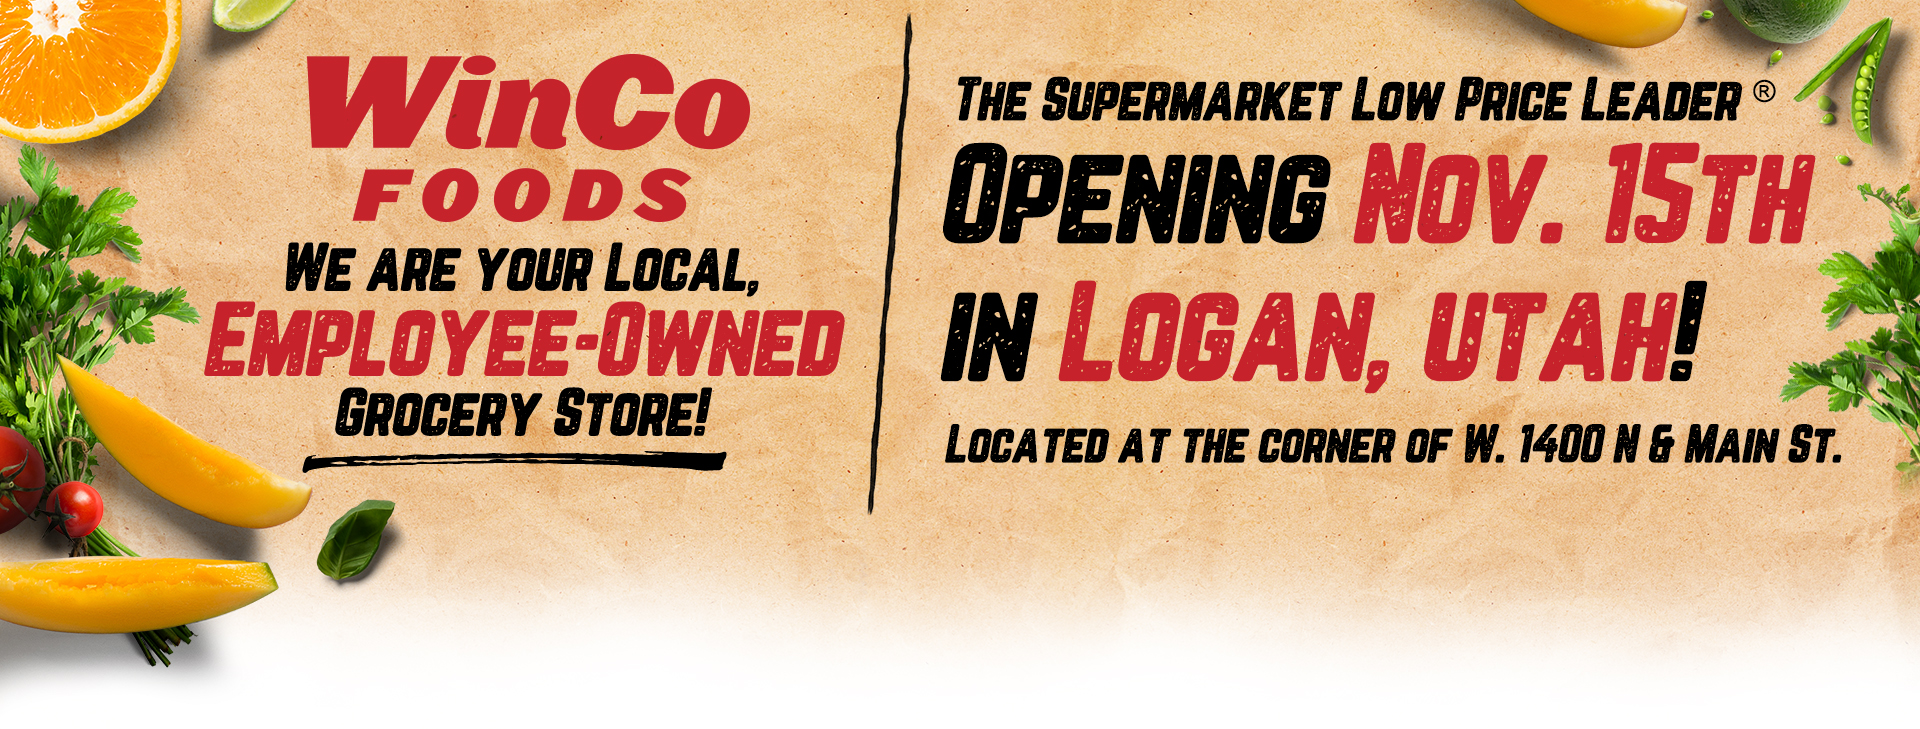 WinCo Foods opening in Logan, UT on Nov. 15th, at the corner of W. 1400 N & Main St.